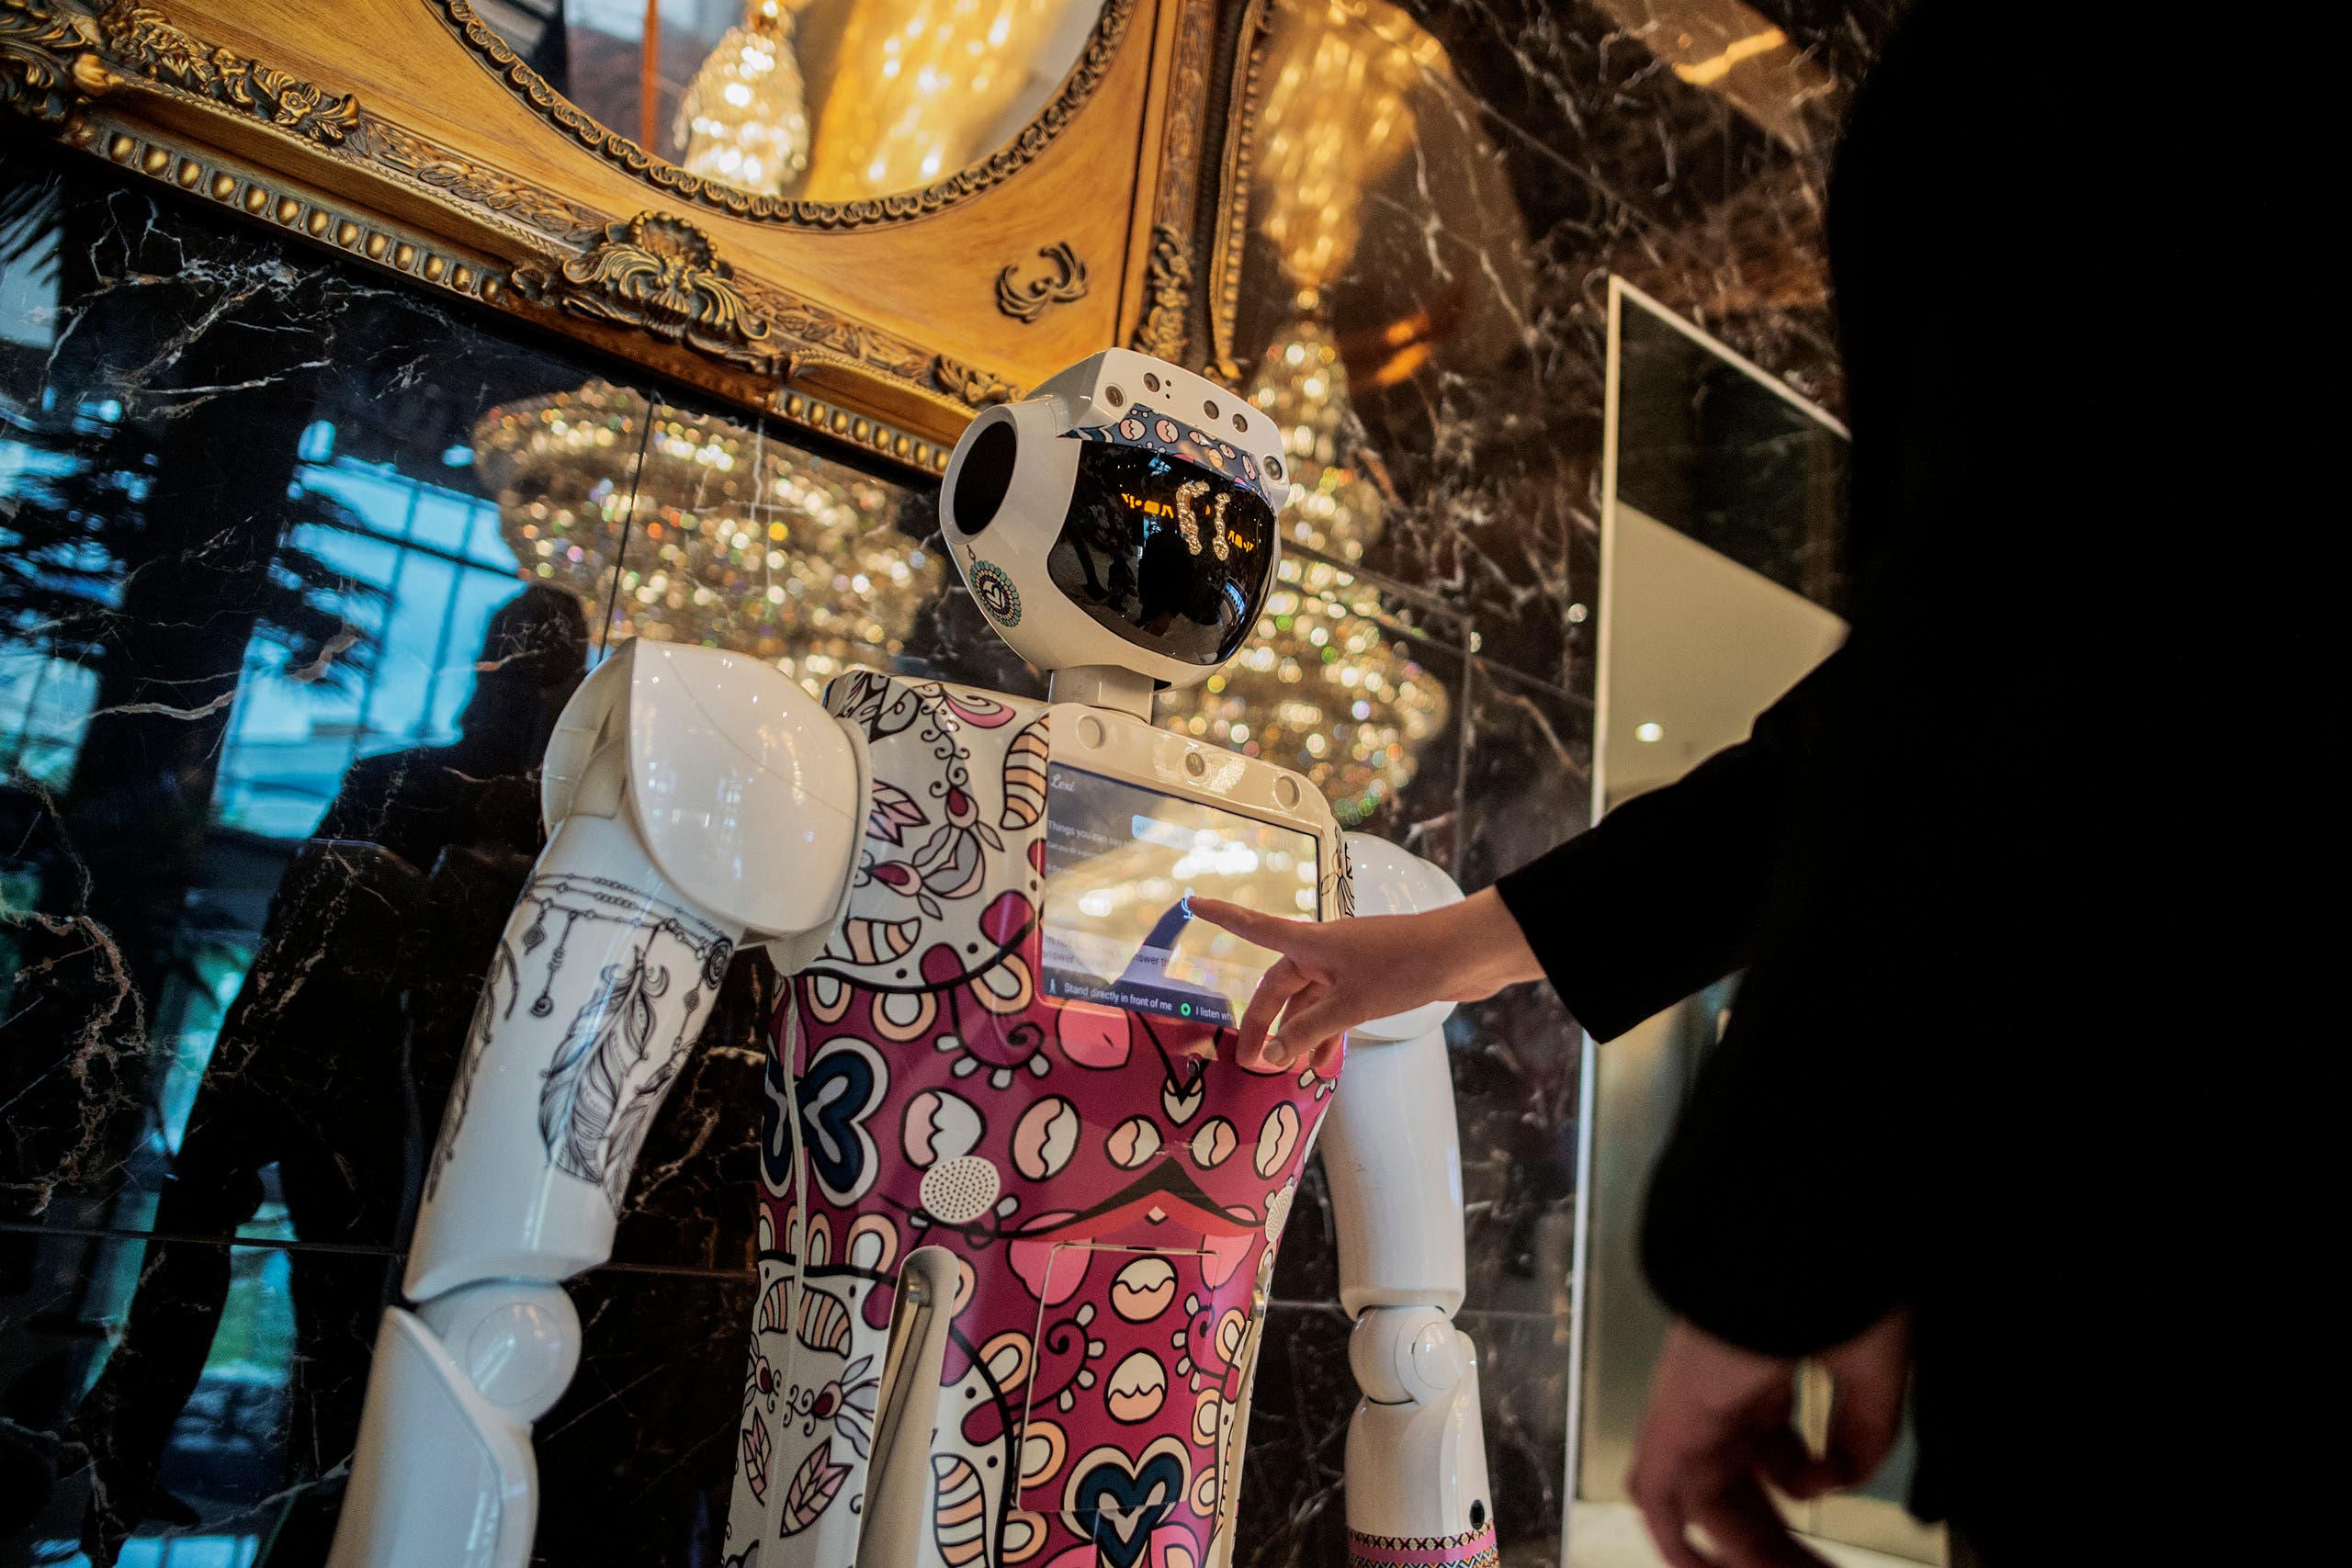 A receptionist asks for information from a robot by CTRL Robotics company in the hall of the Sky Hotel in Sandton, South Africa, on January 29, 2021. (AFP)